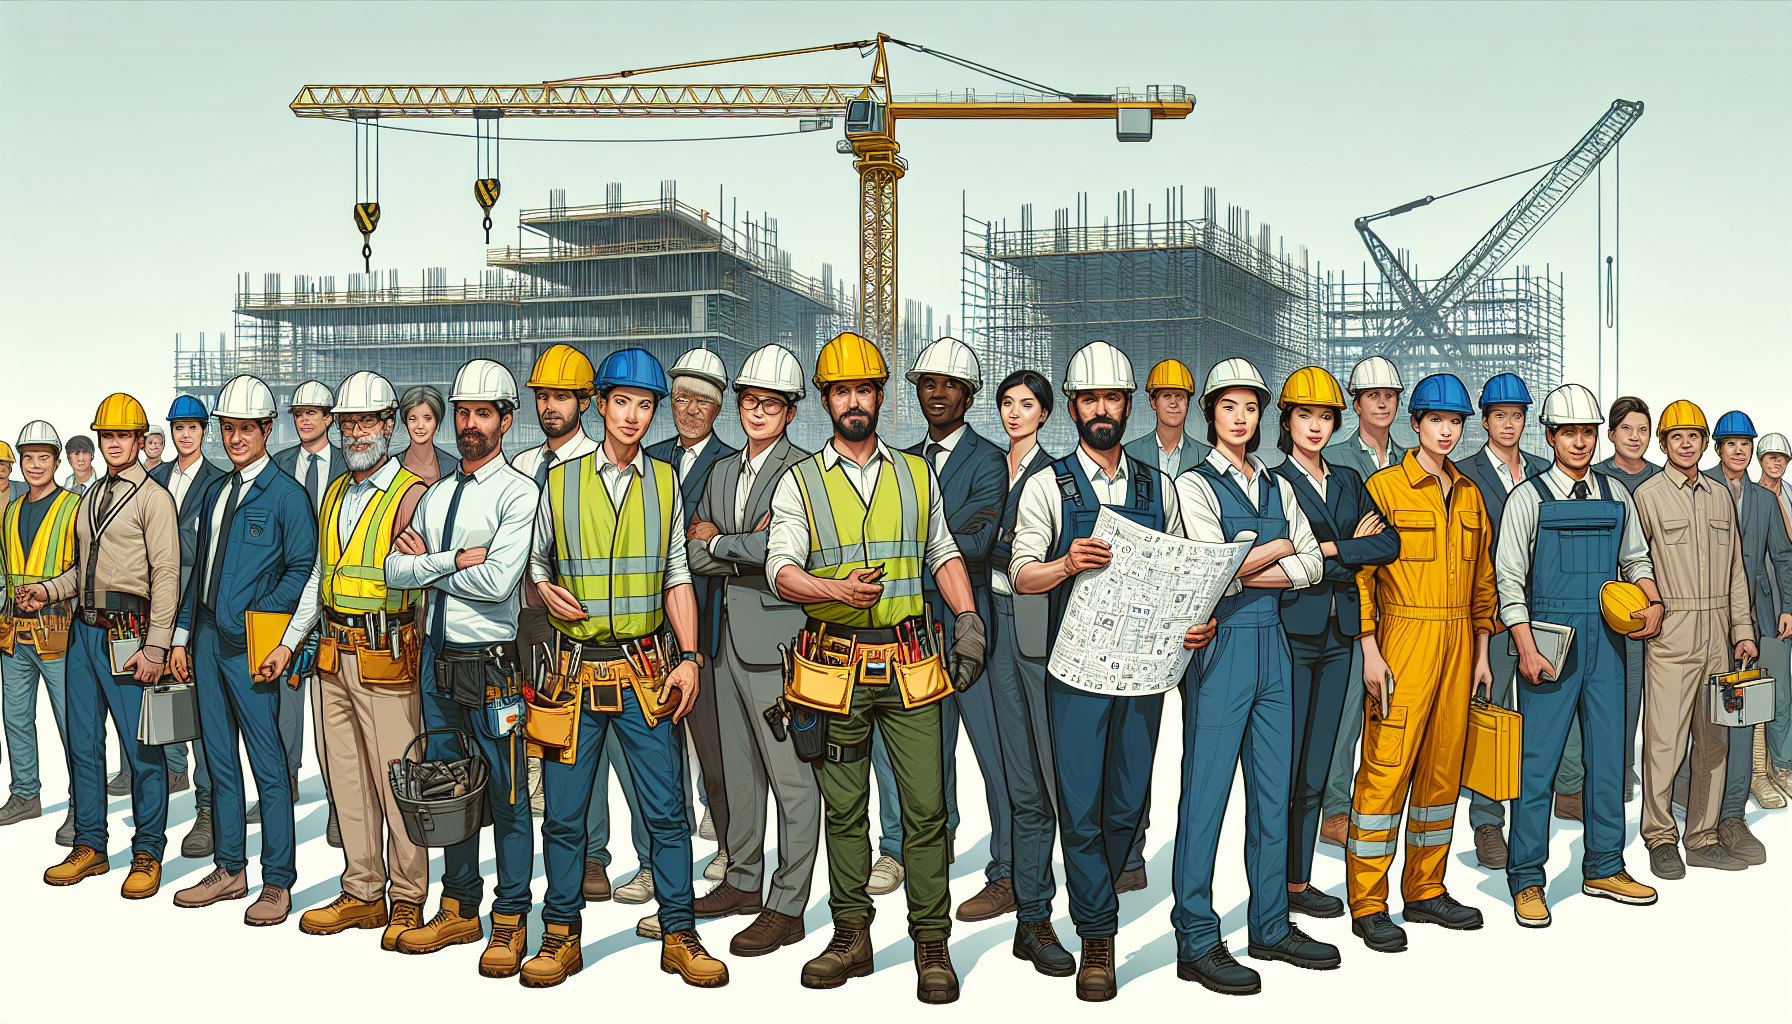 Successful implementation of employee handbooks in construction companies